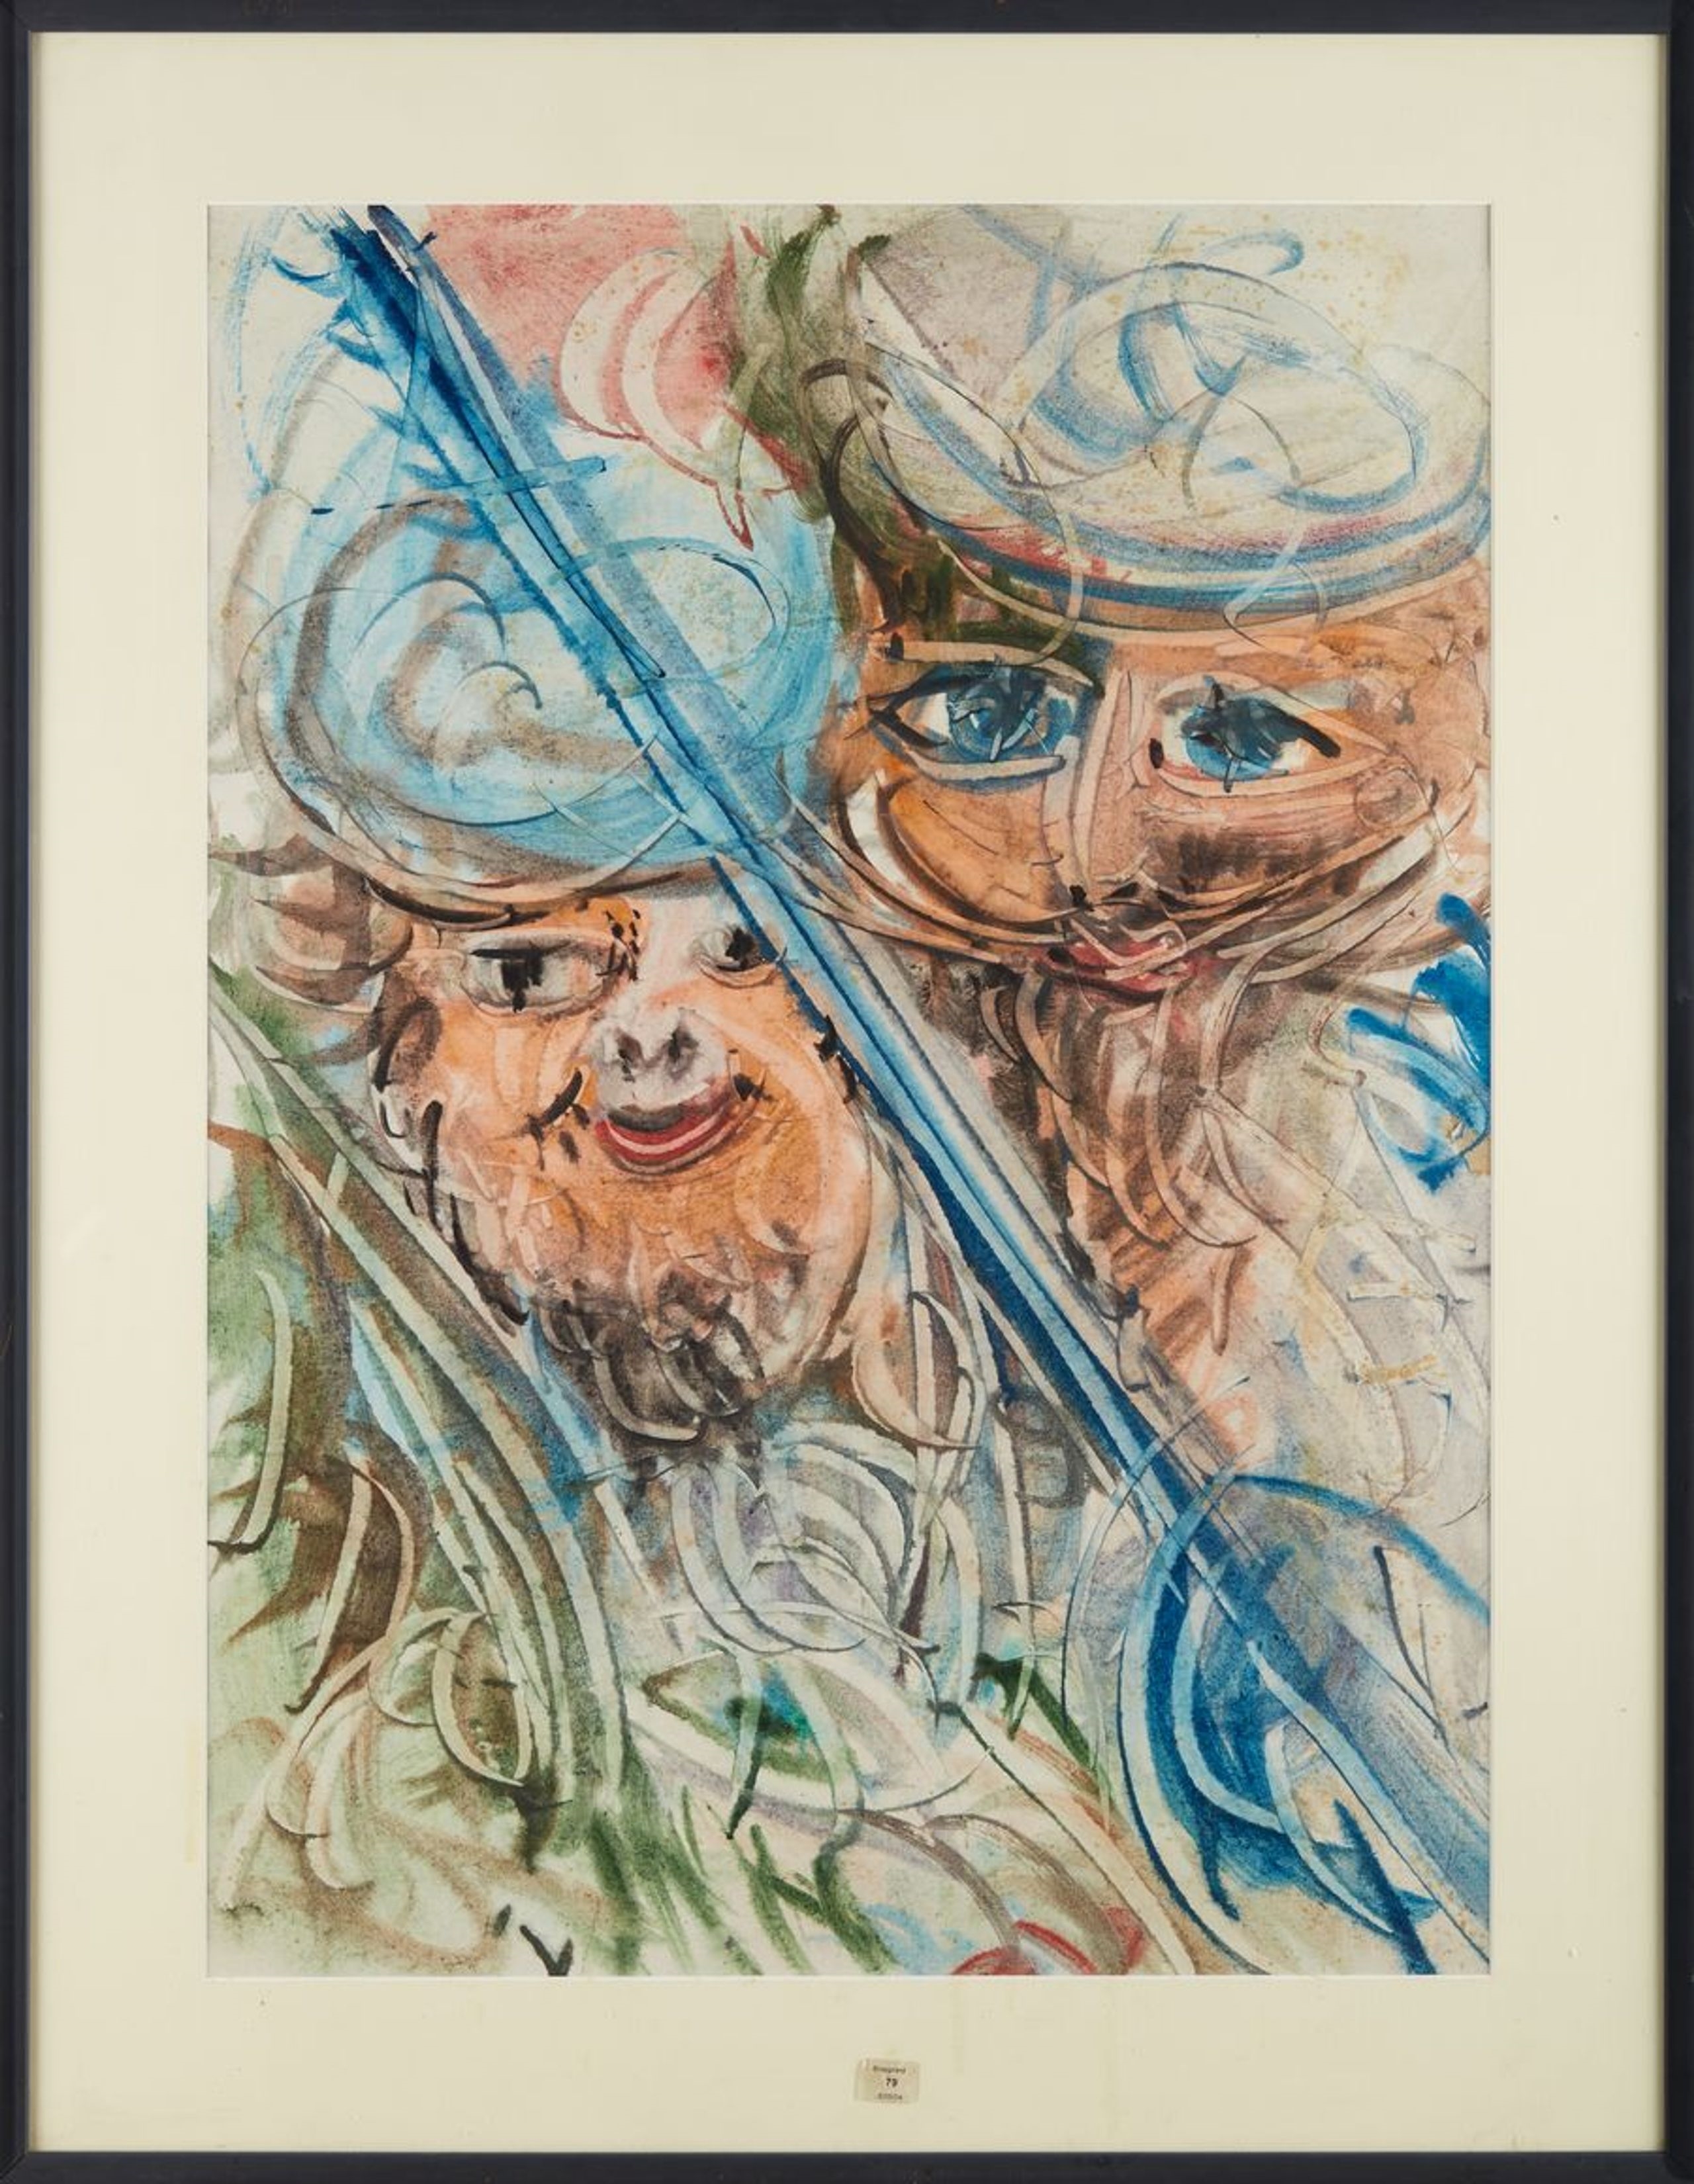 Double self-portrait by Anatoly Zverev, 1982